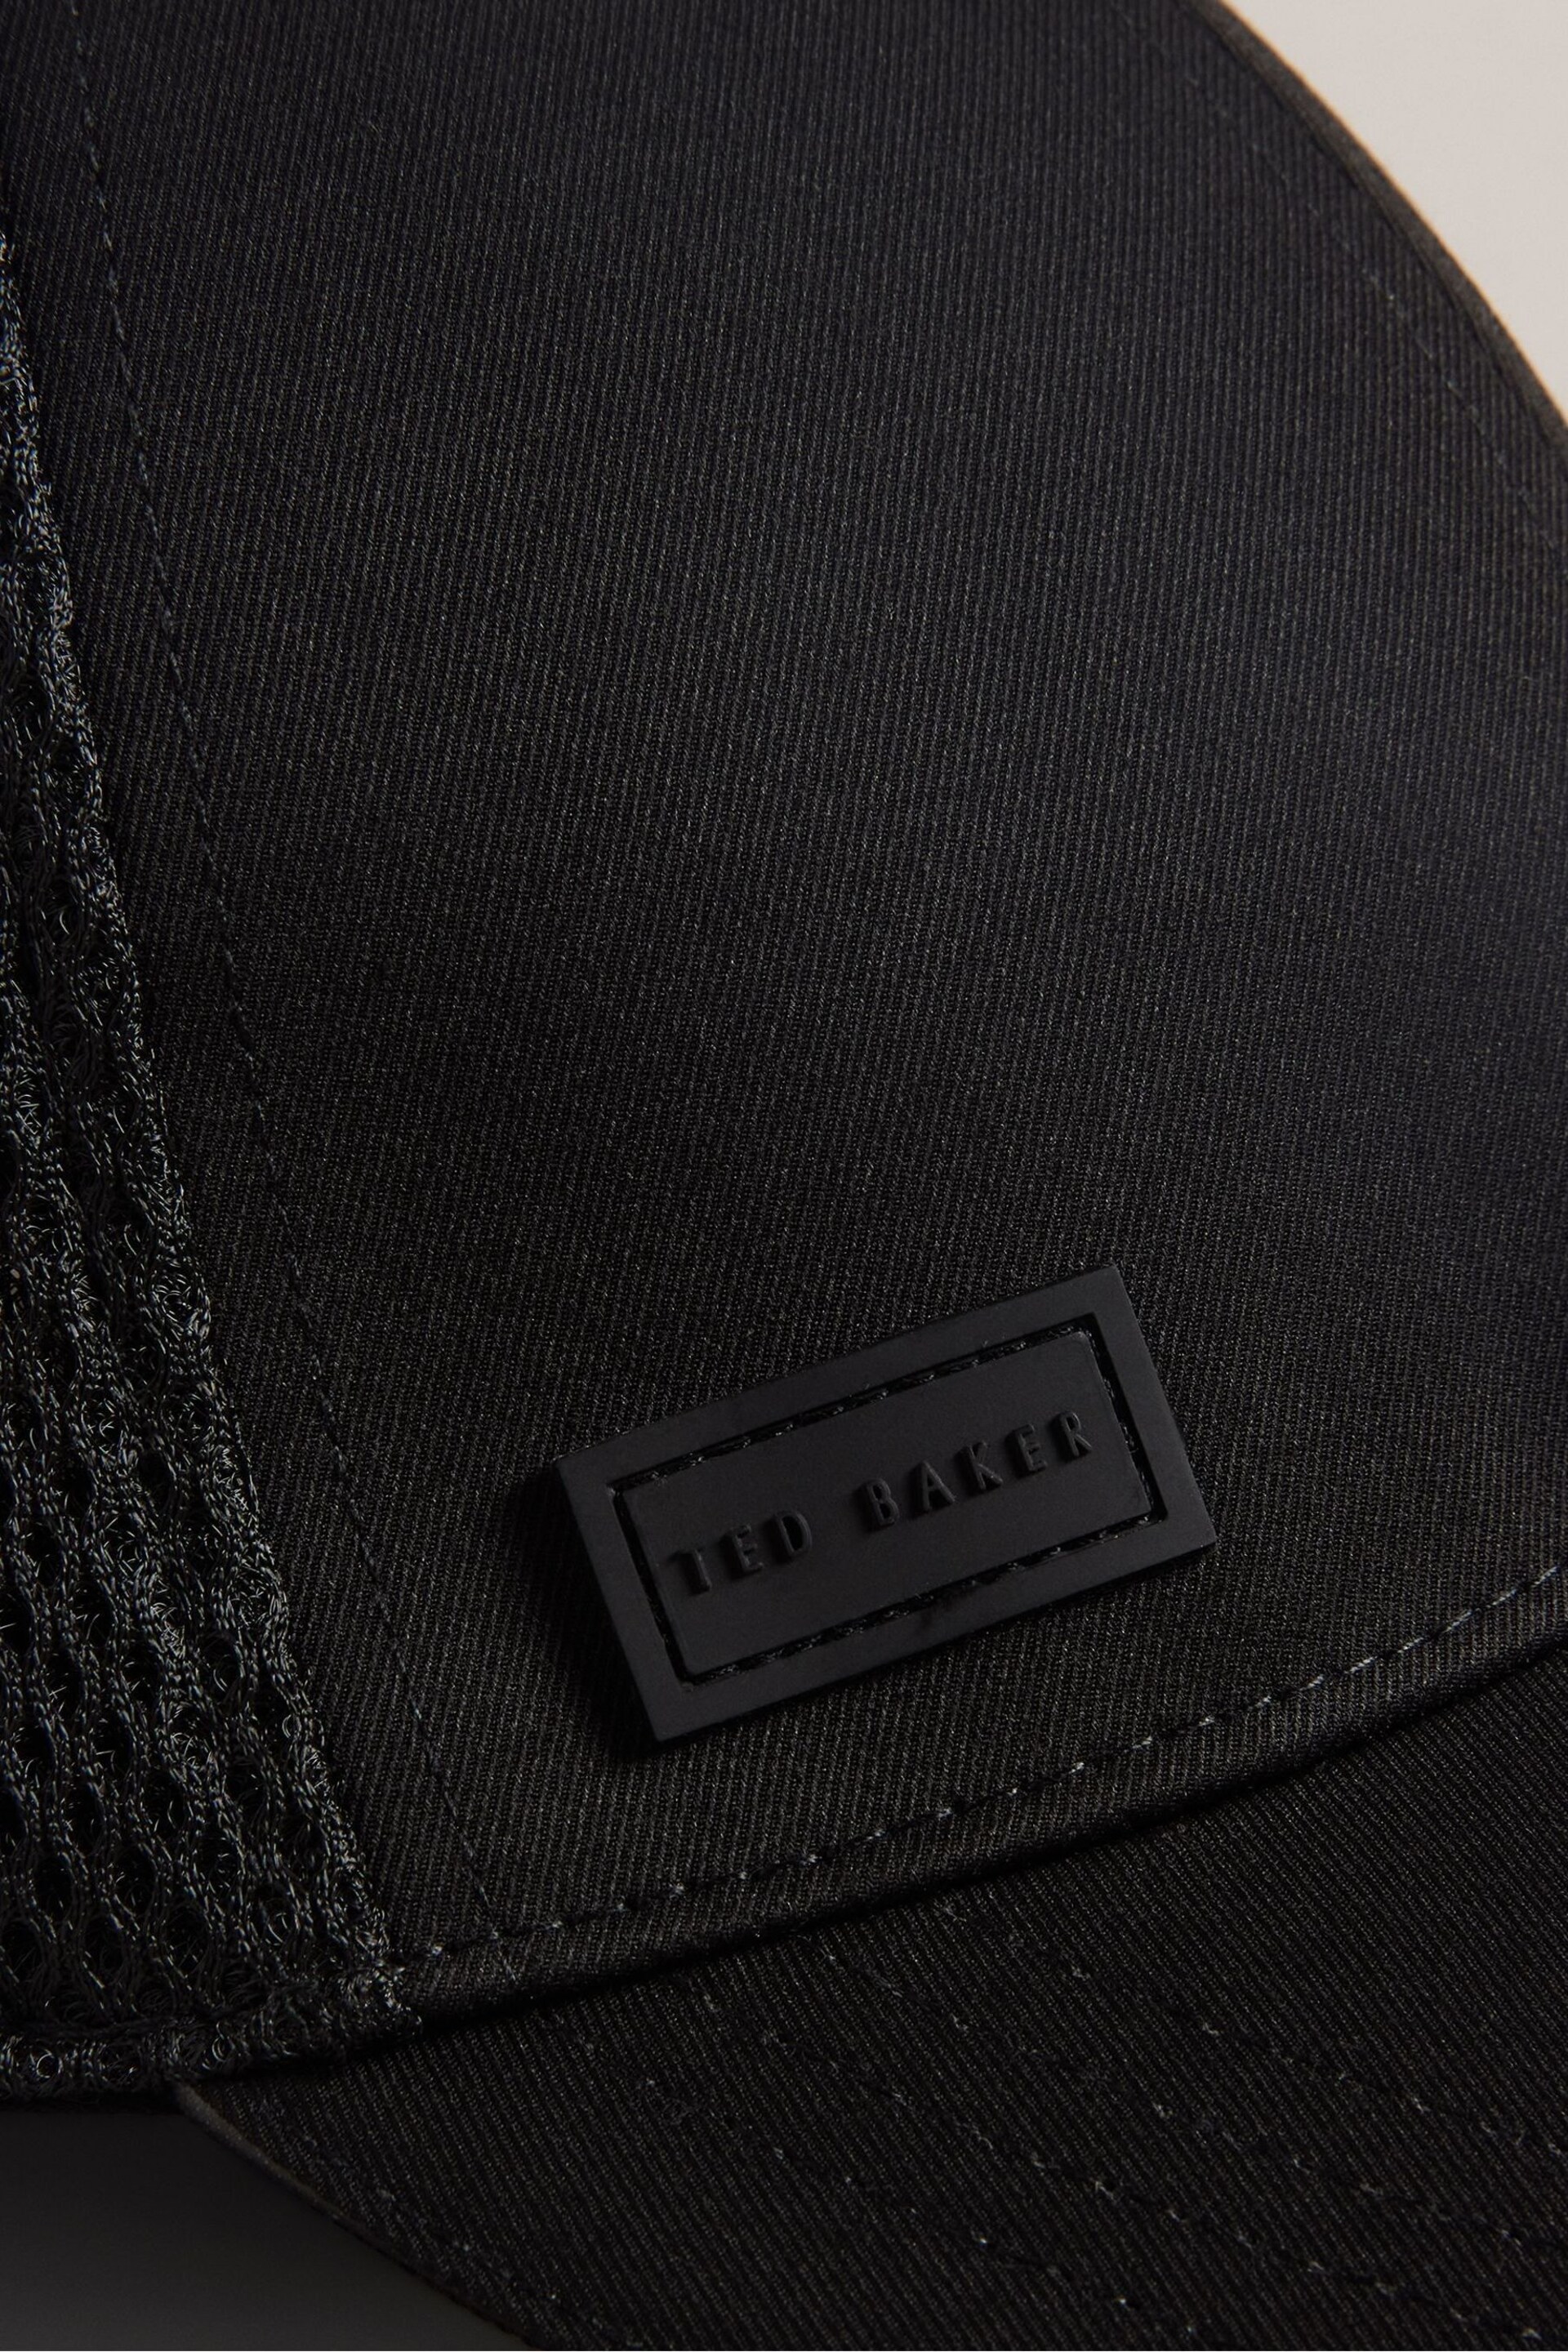 Ted Baker Black Ethanns Mesh And Cotton T Cap - Image 4 of 5